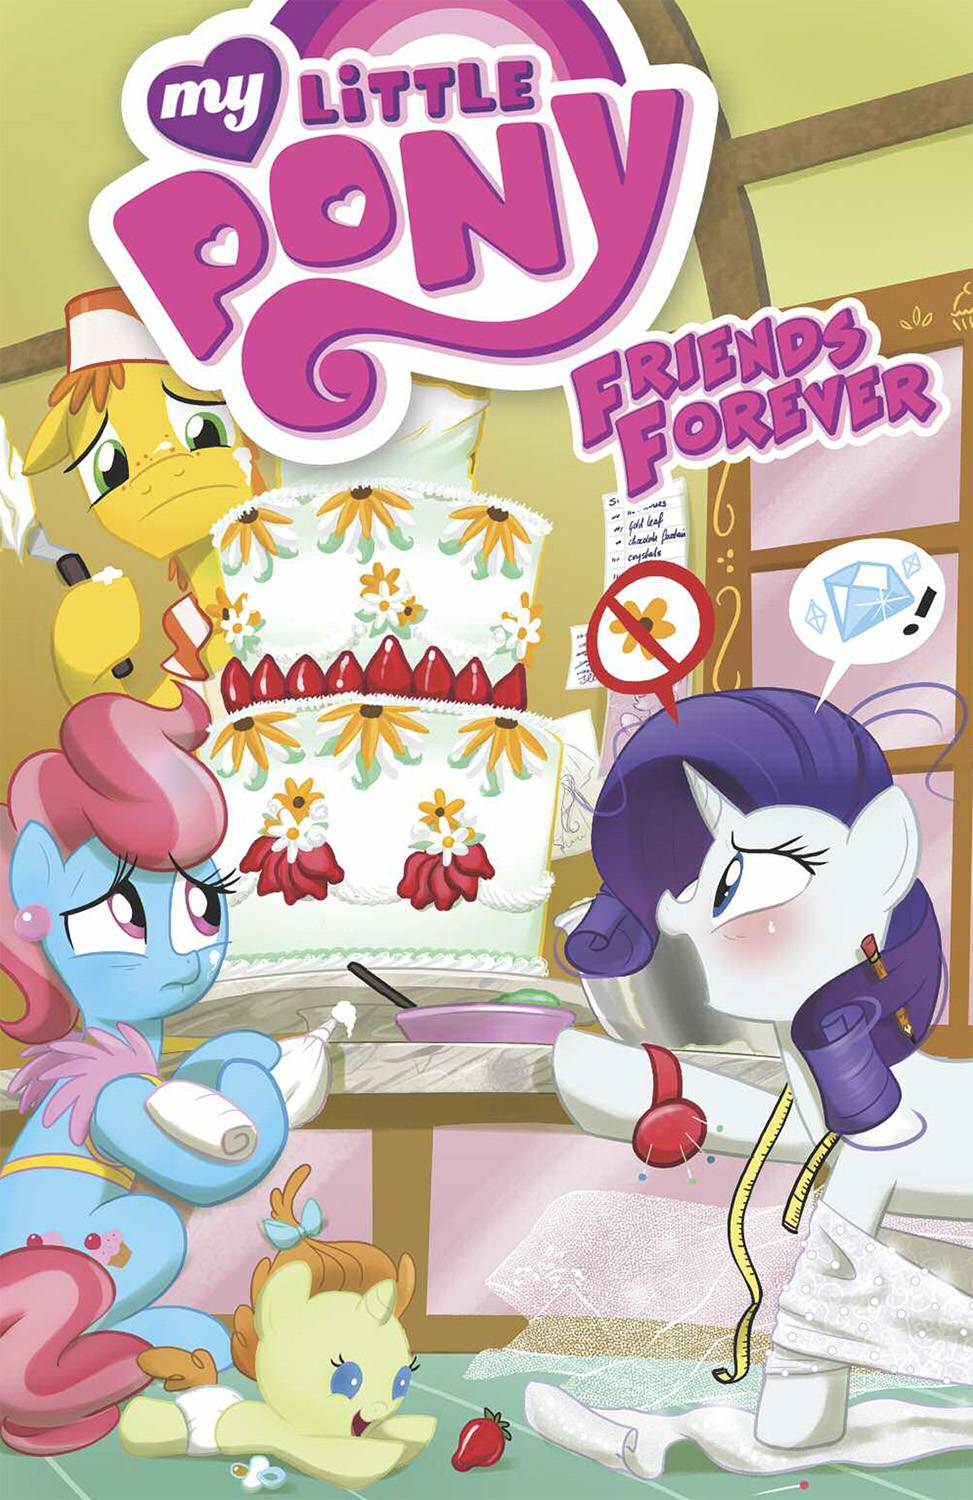 MY LITTLE PONY: FRIENDS FOREVER VOL 05